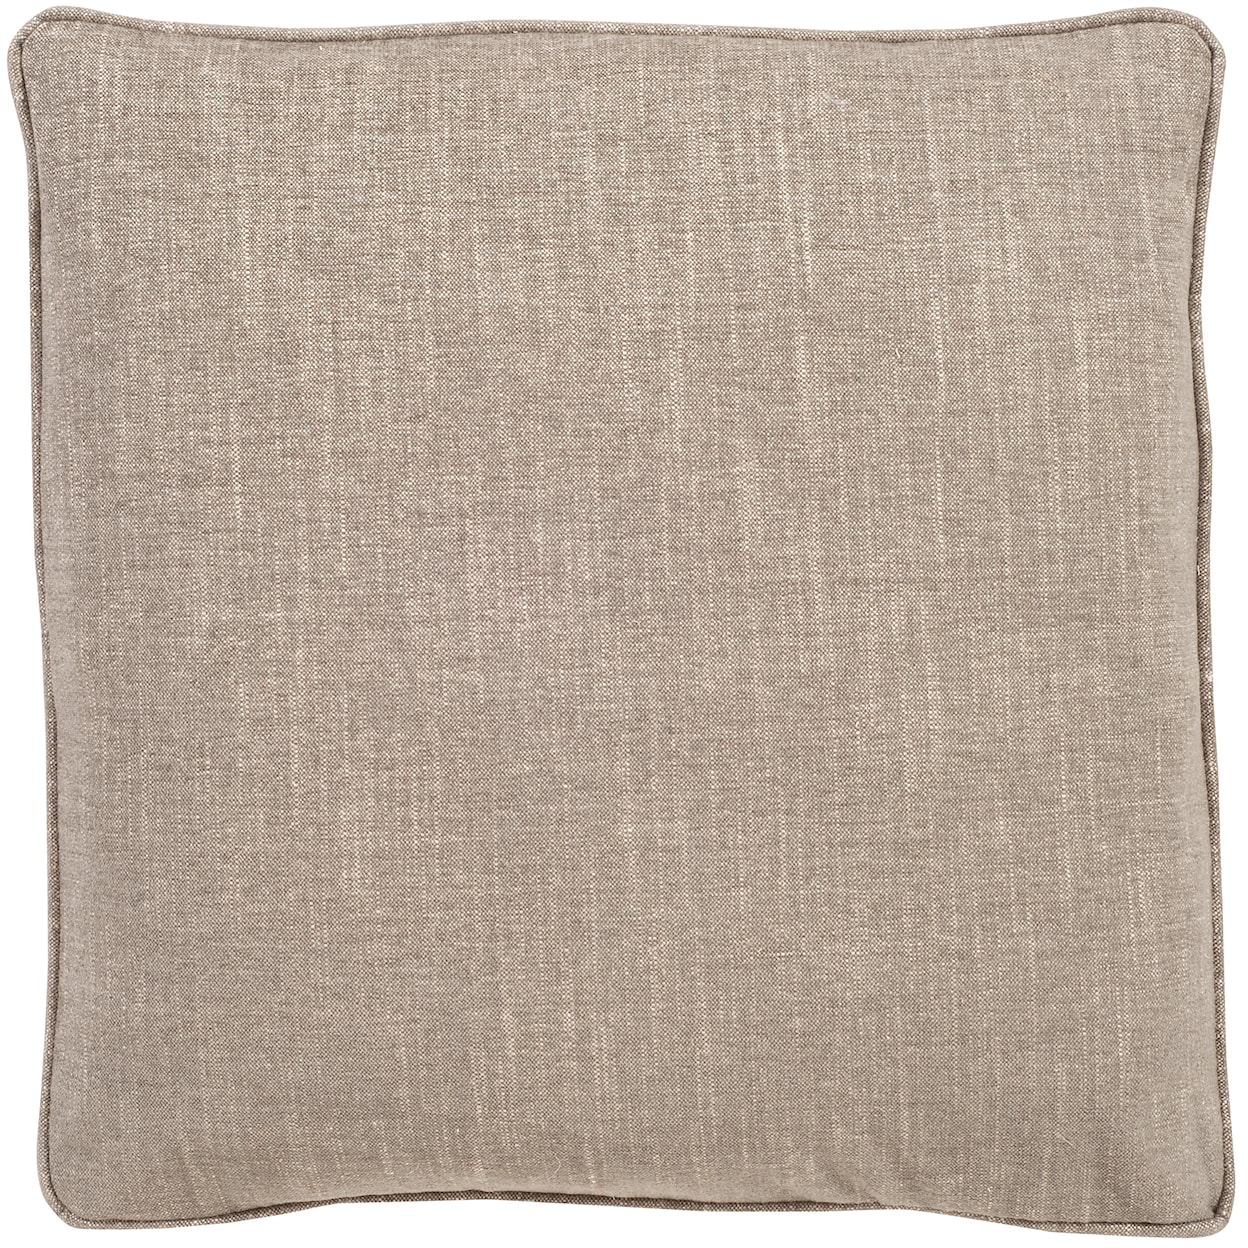 Bradington Young Accessories 18-Inch Pillow